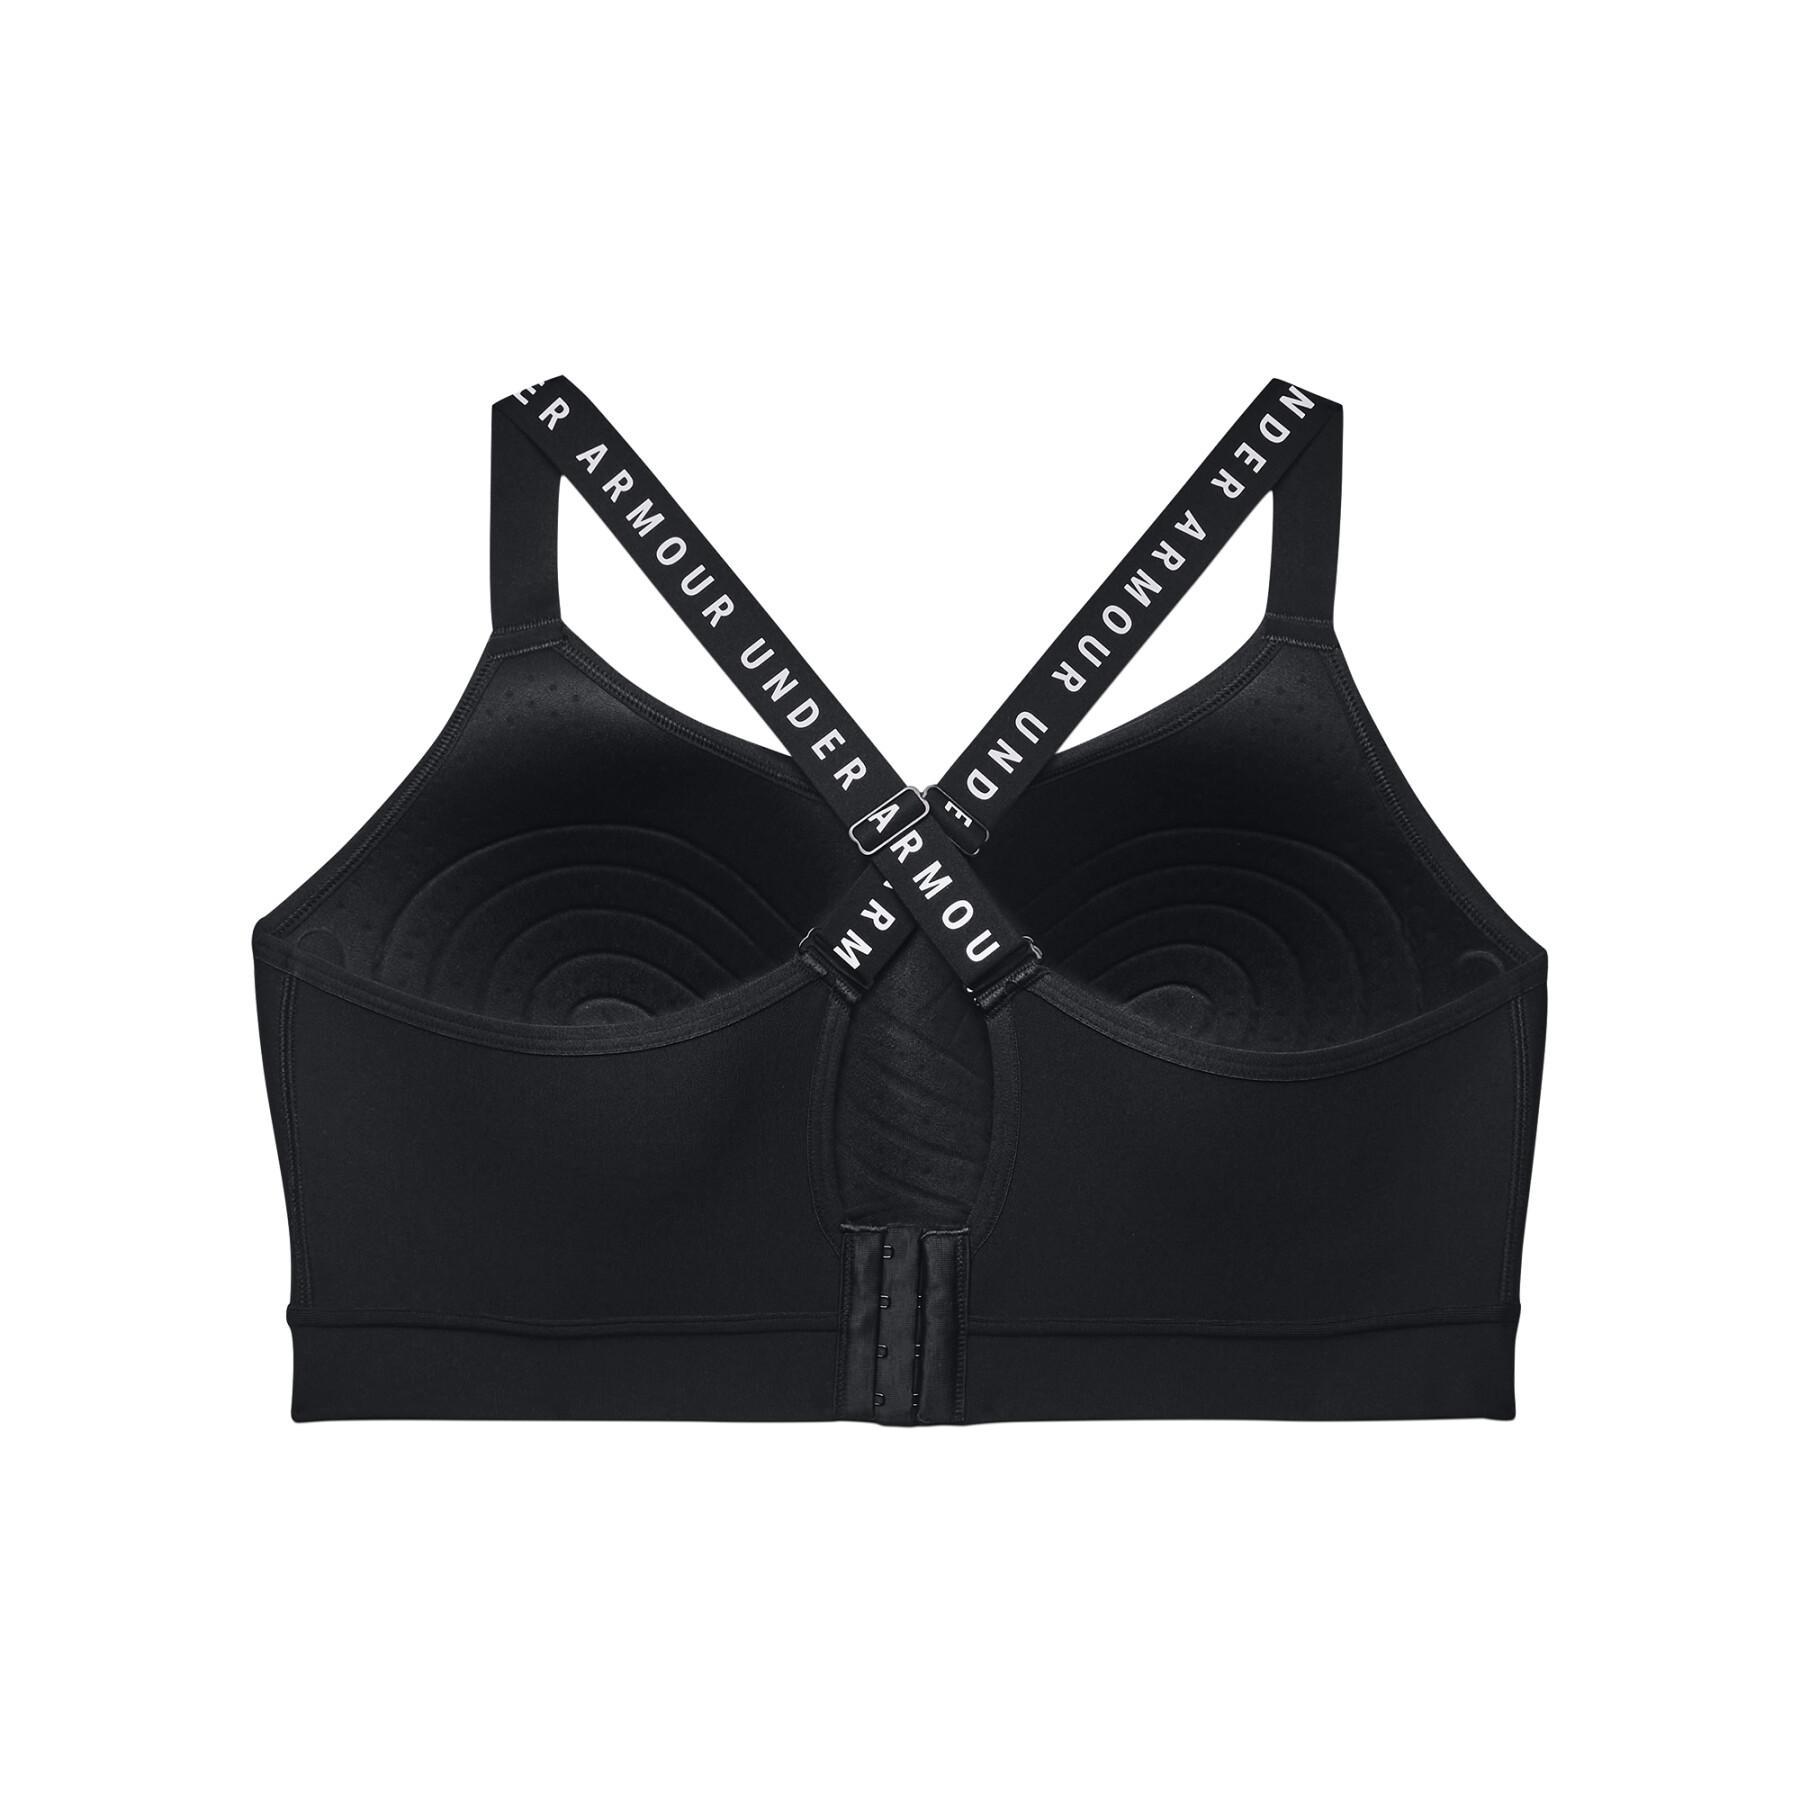 Large size bra for women Under Armour Infinity